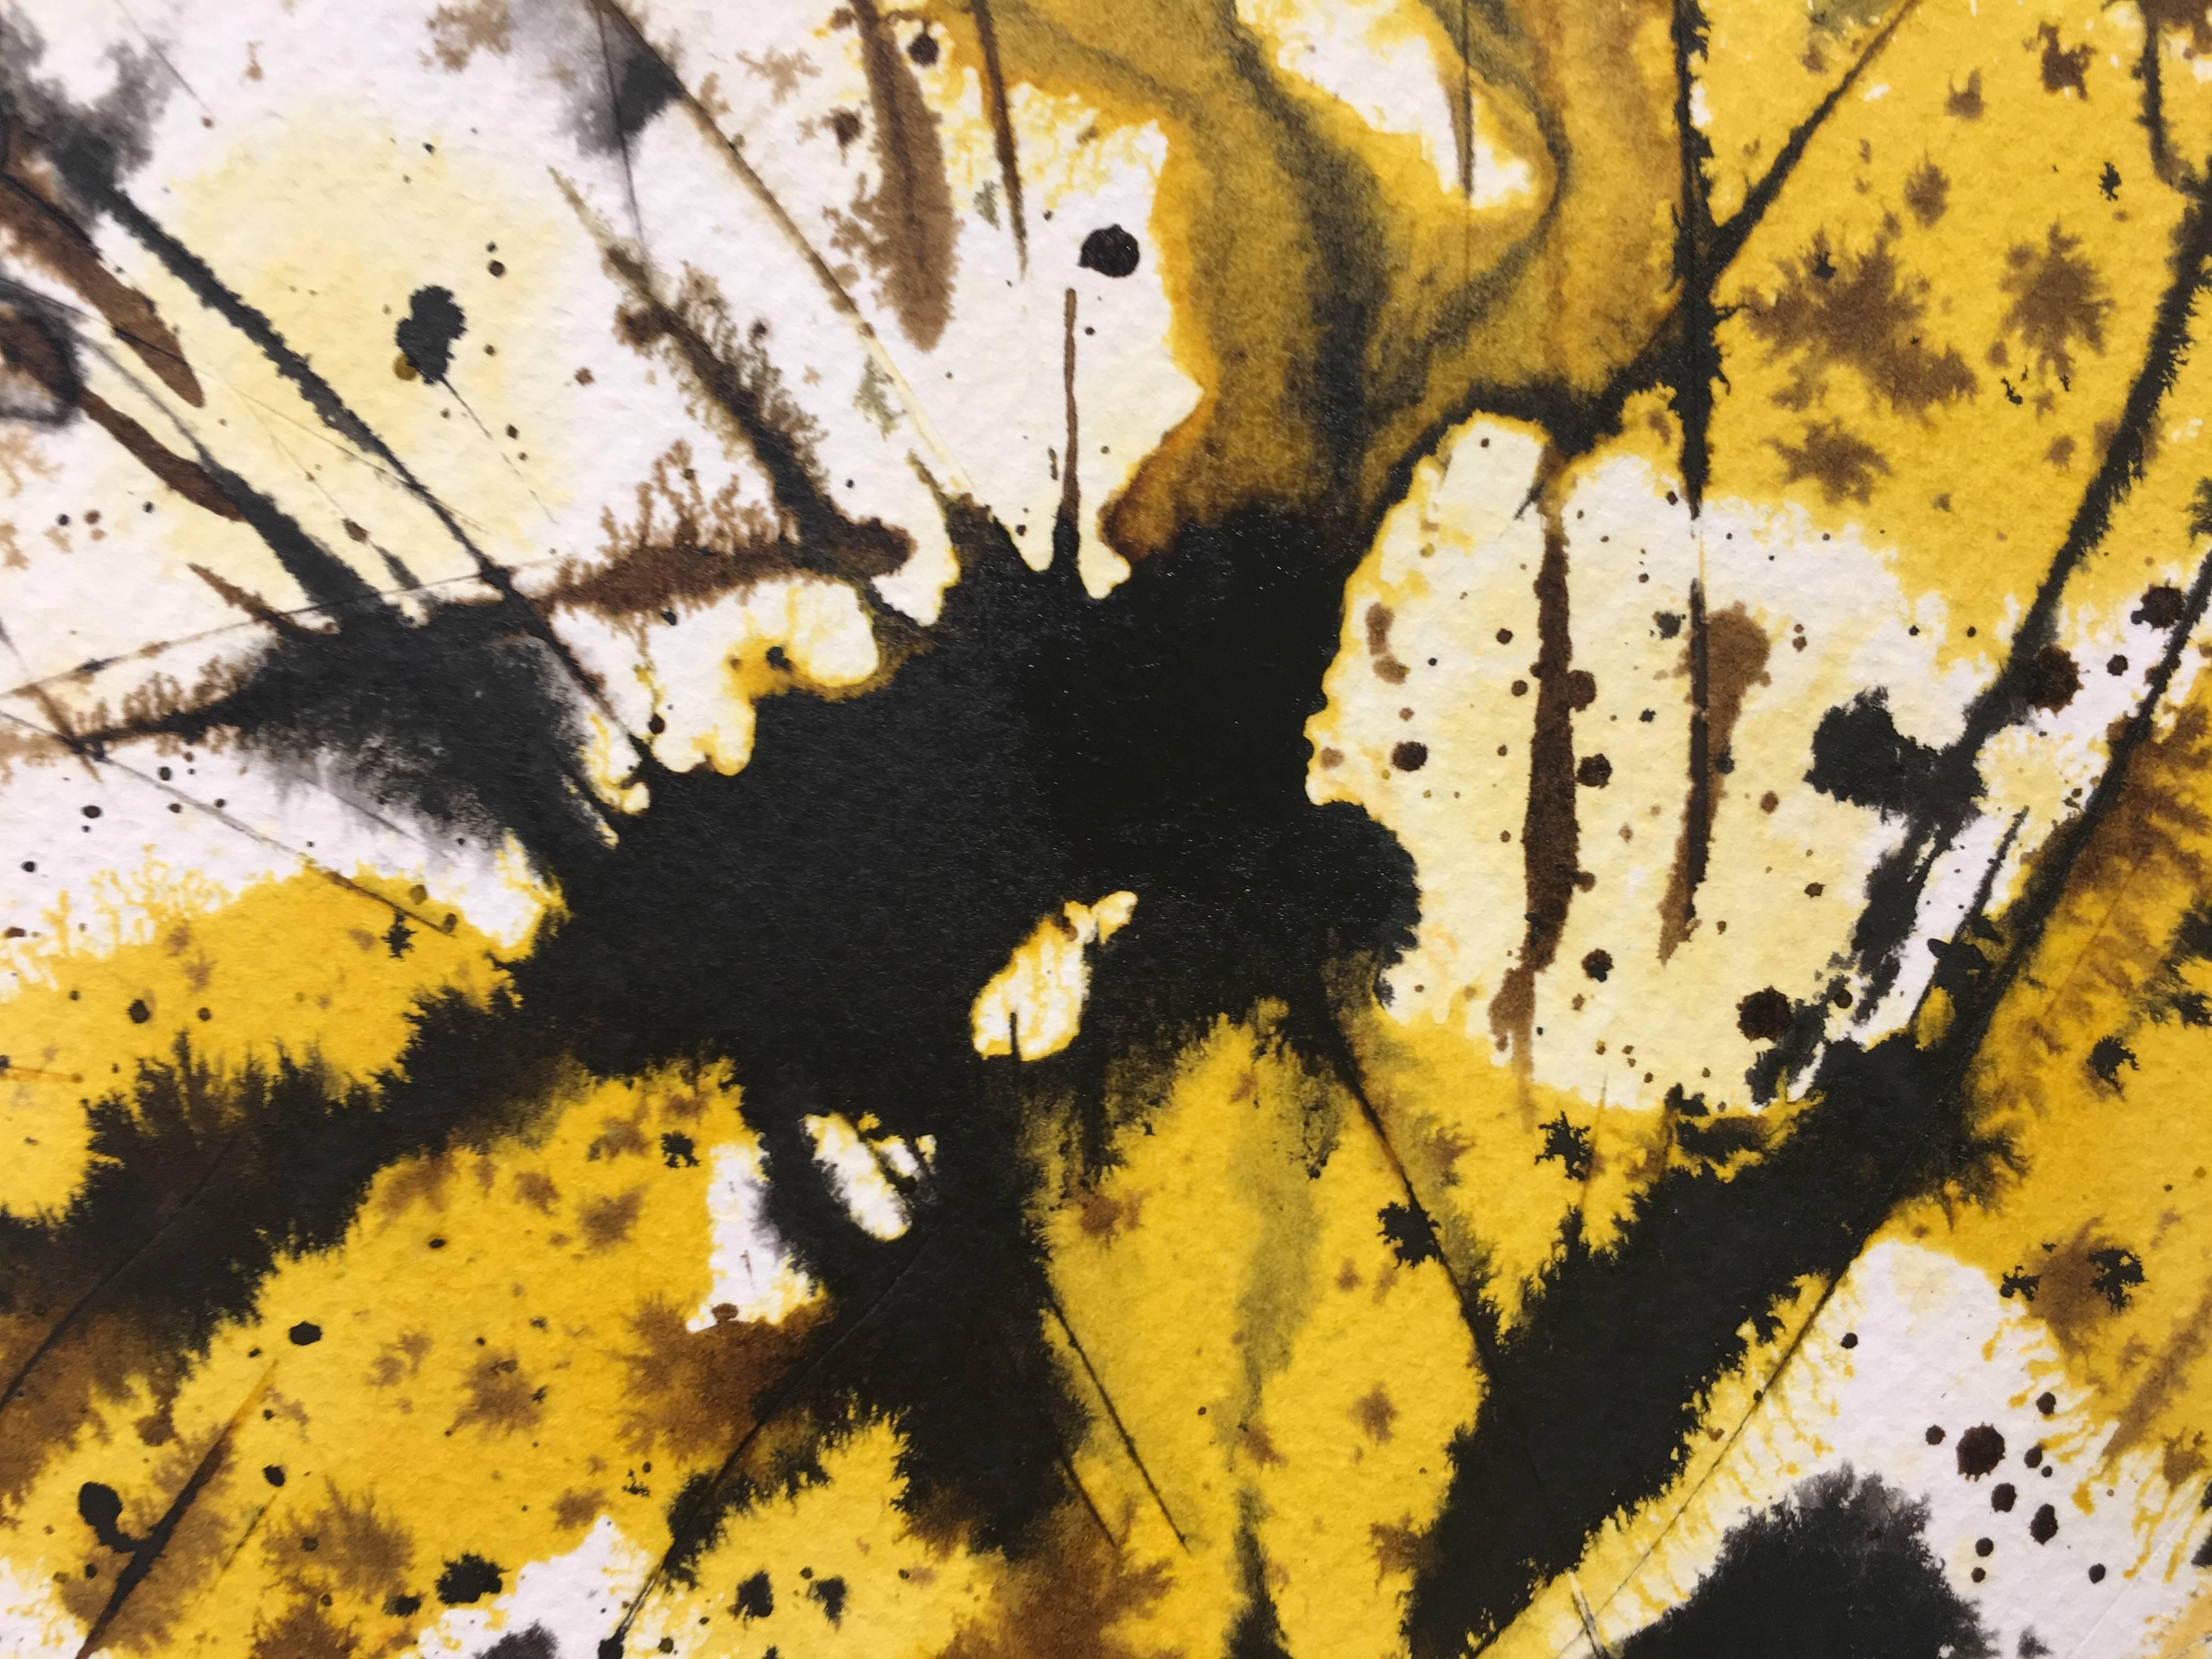 Tharrats  Black  Yellow  Golden  Original abstract acrylic on paper  - Abstract Painting by Josep THARRATS